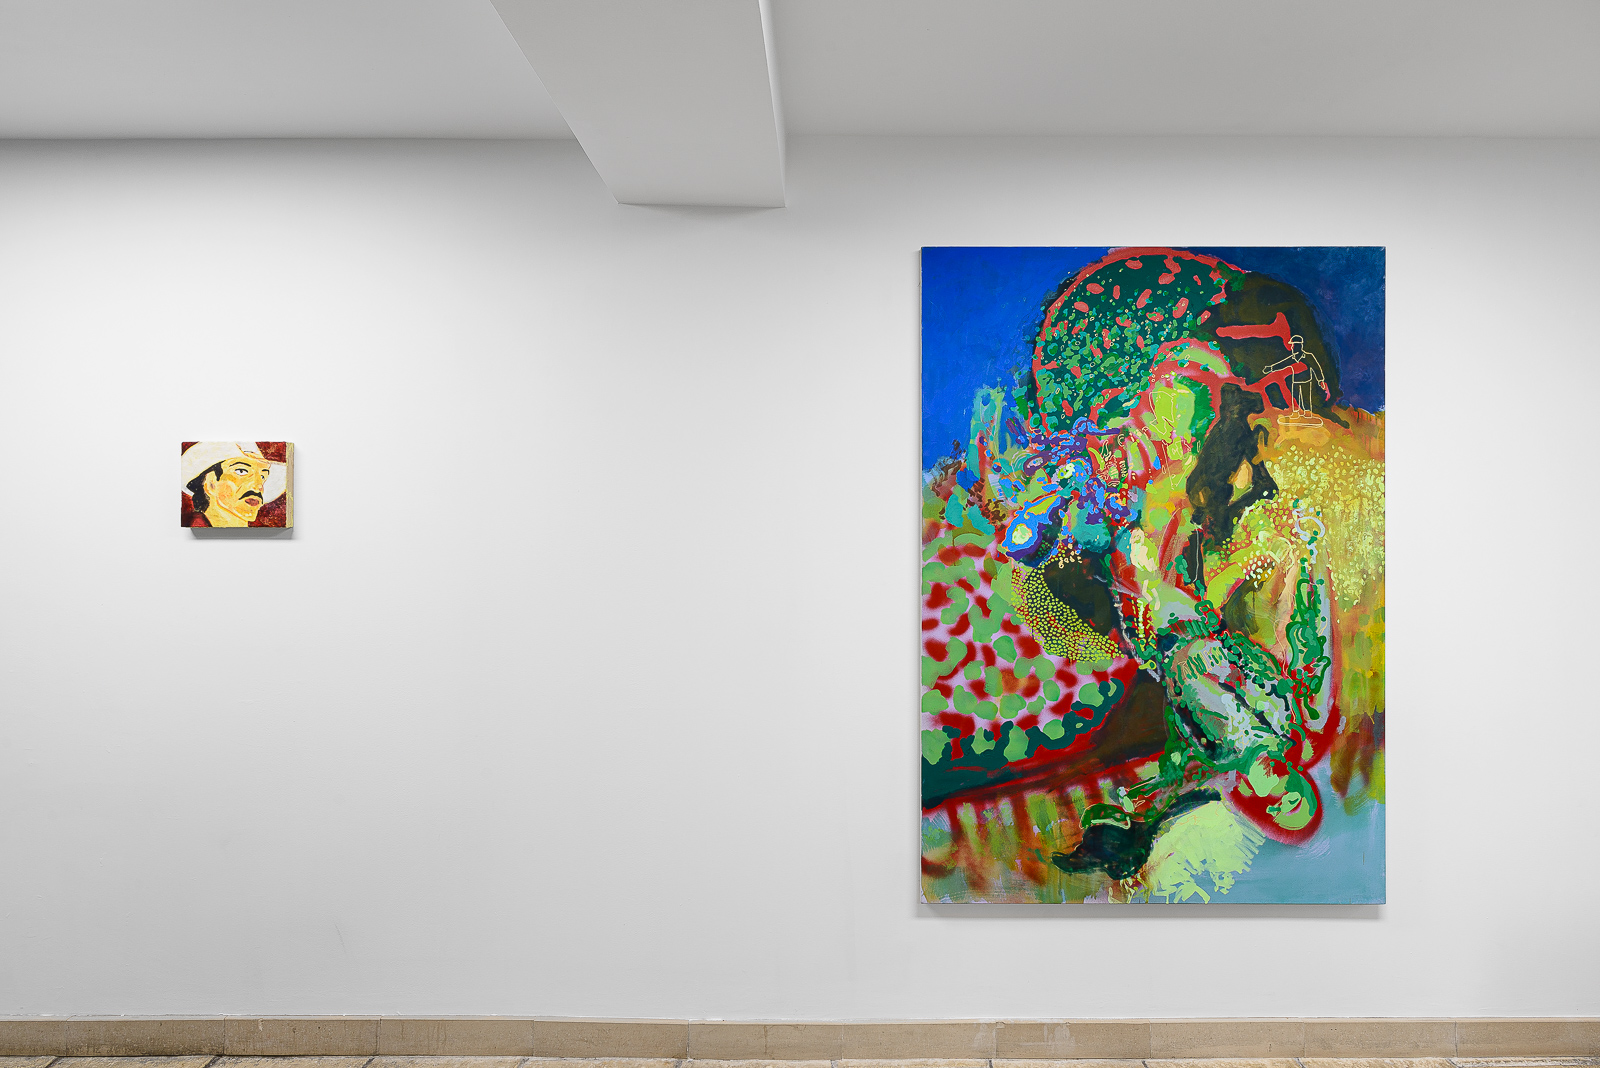 Installation view of Paul Curti's Cosmic Dancer, exhibited at Galerie l'inlassable. Works entitled Cowboy, and La chute de Mister green.